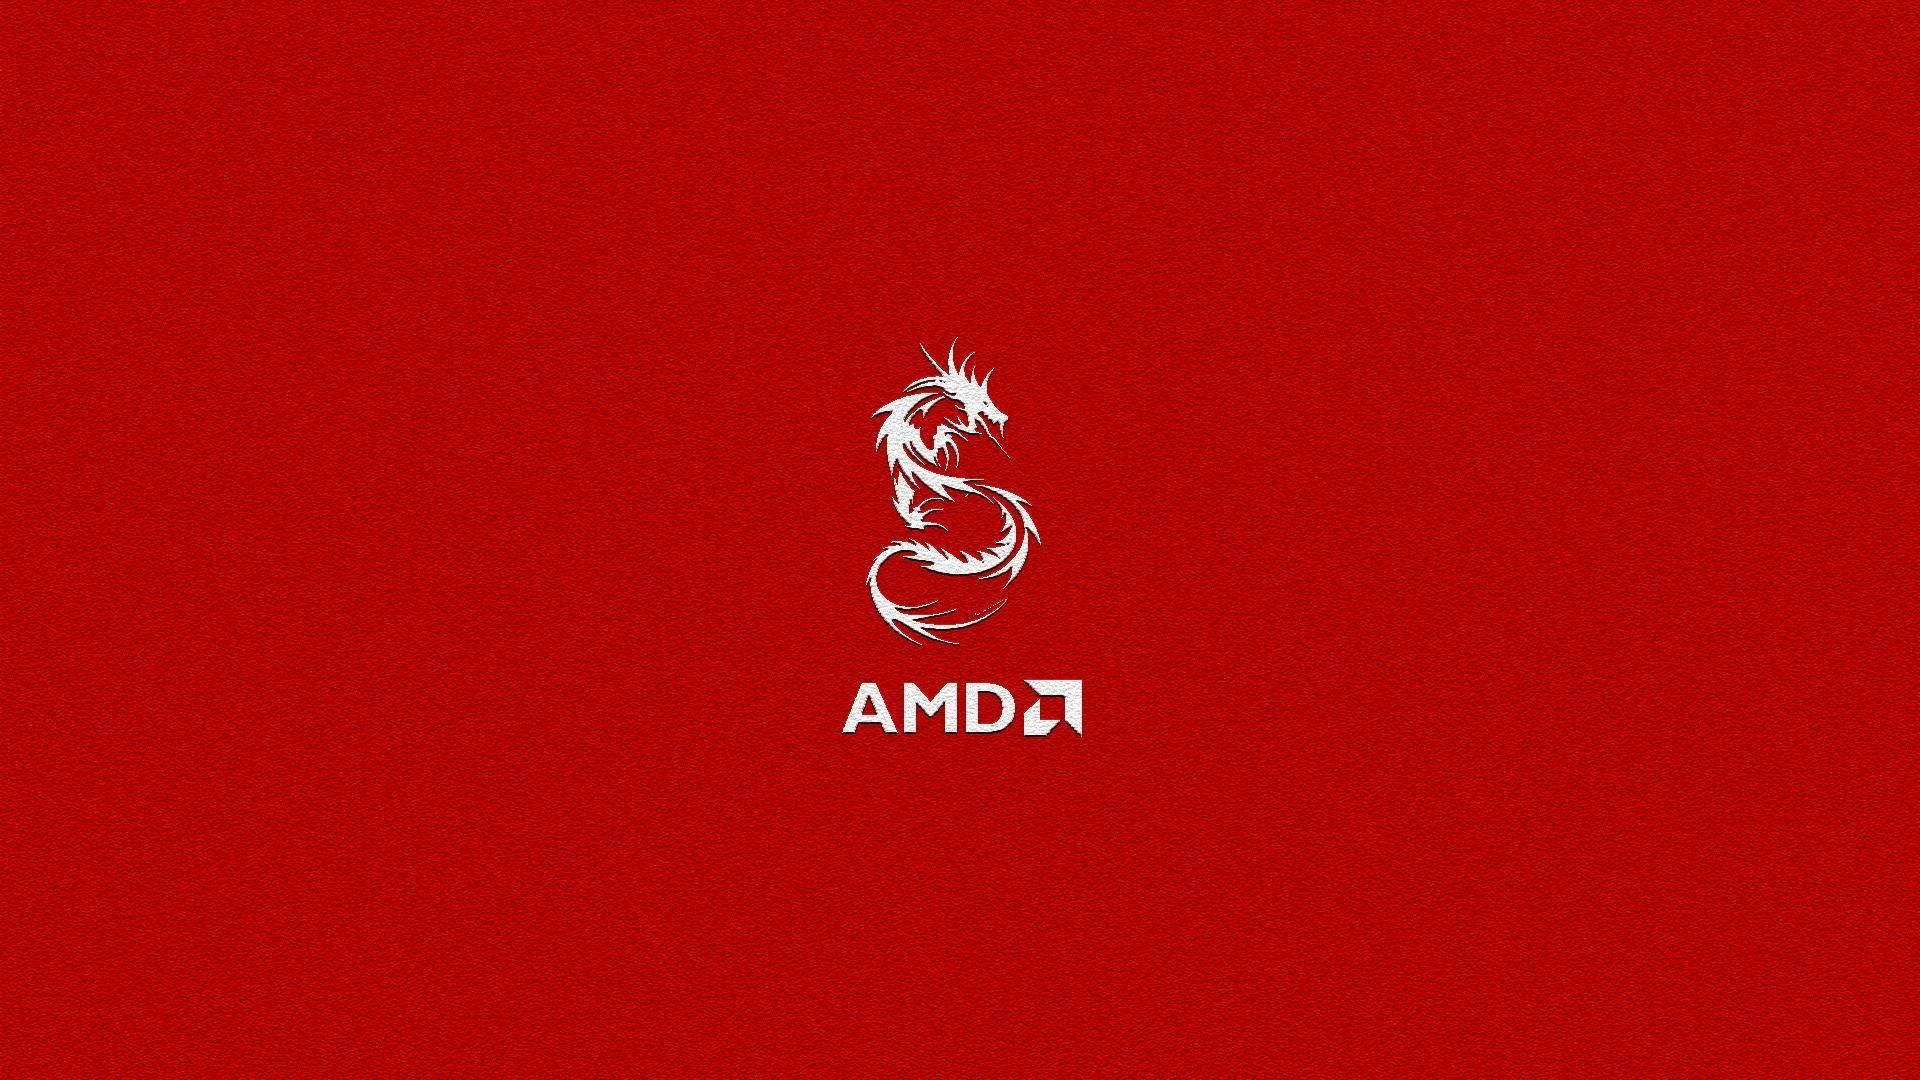 Amd Dragon Red Surface